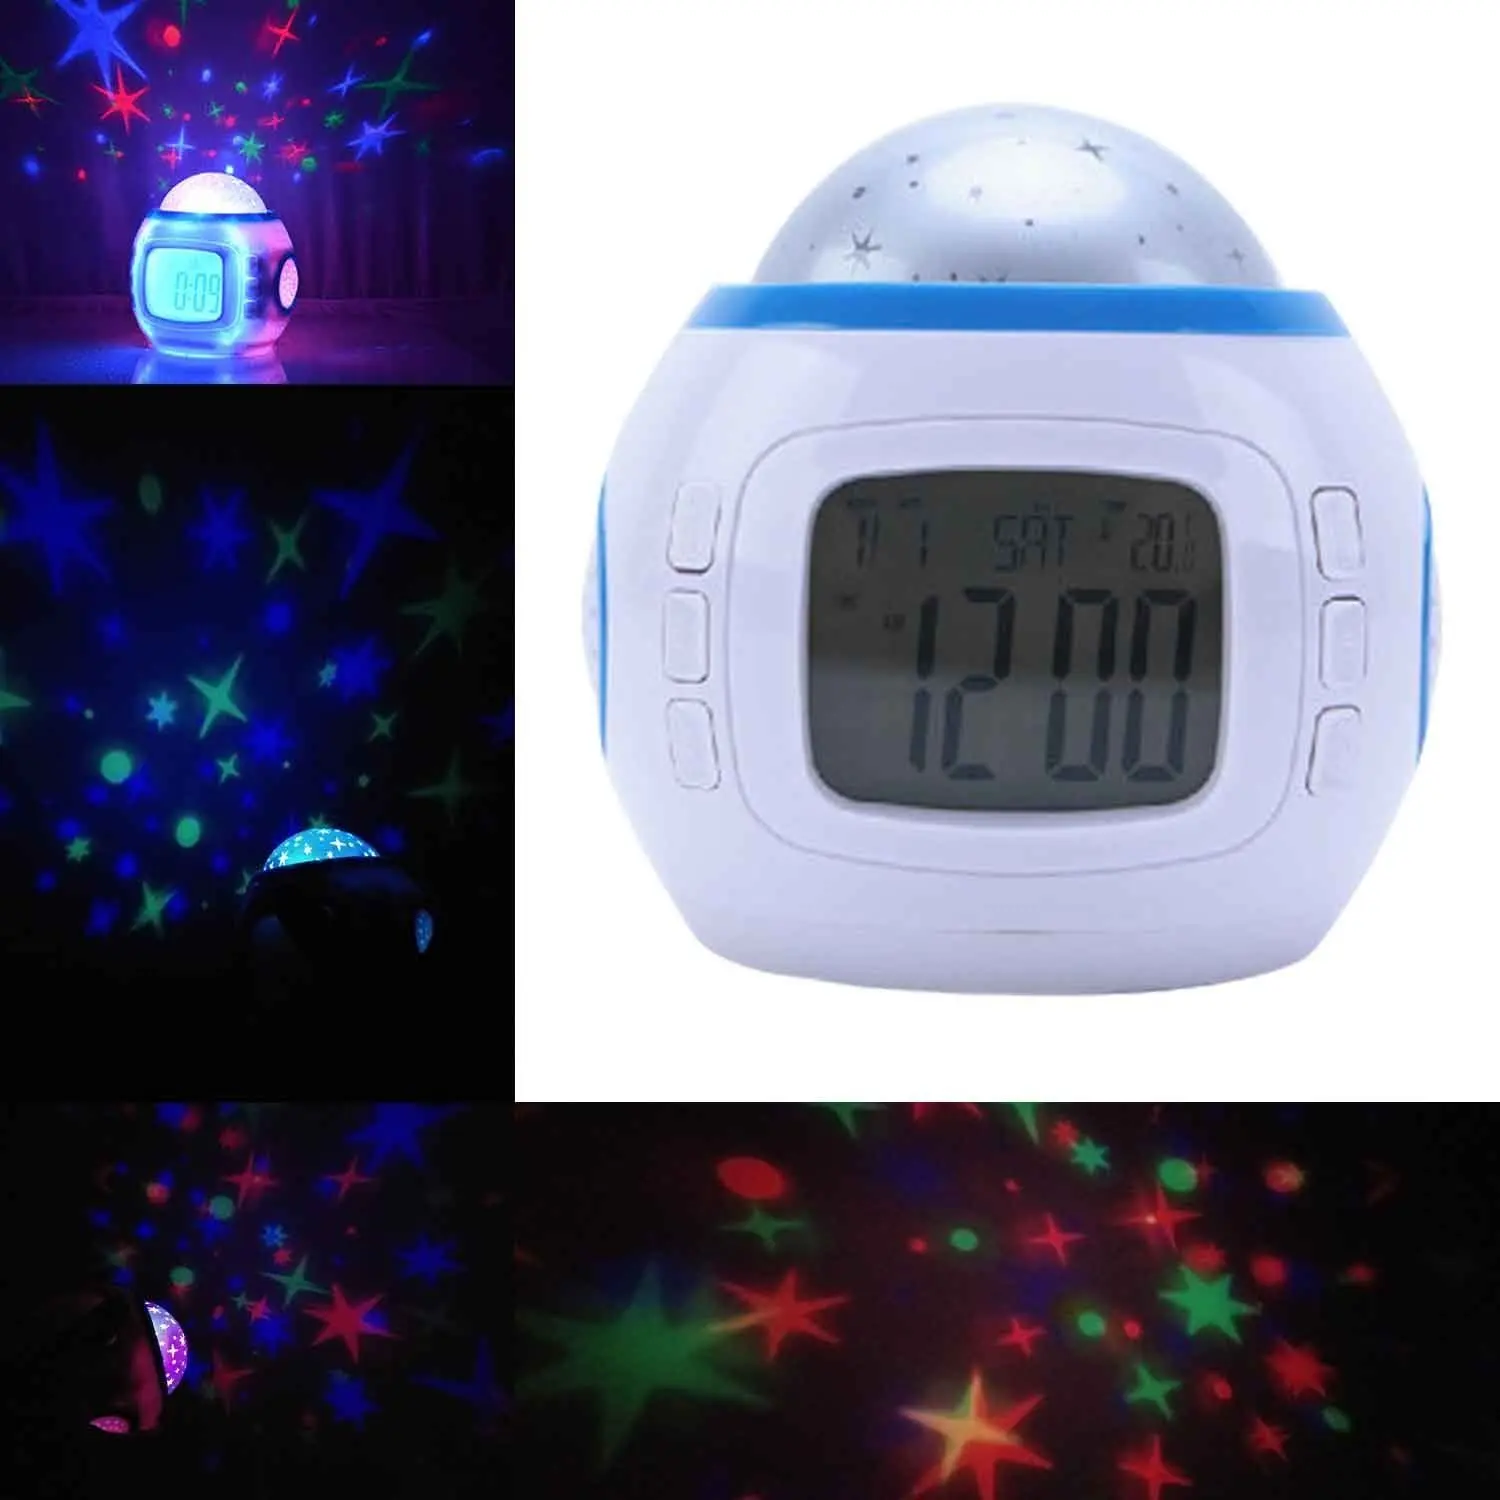 Digital Projection Clock Countdown Timer Snooze 12/24H Alarm Desk Clock with Temperature Display